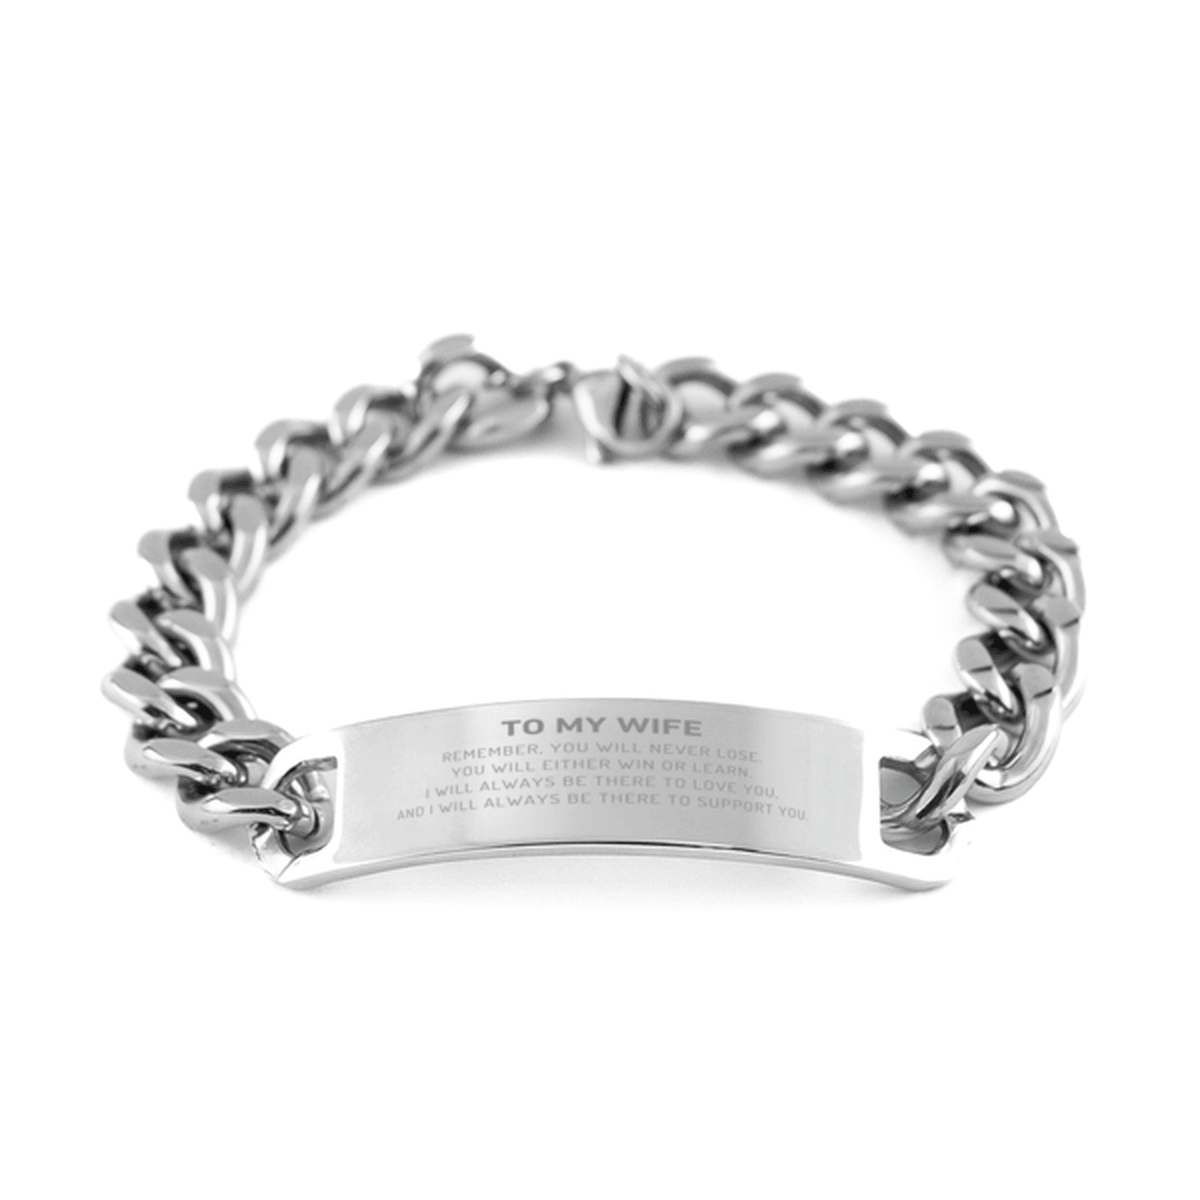 To My Wife Remember, you will never lose. You will either WIN or LEARN, Keepsake Cuban Chain Stainless Steel Engraved Bracelet Birthday Christmas Valentine Gifts - Mallard Moon Gift Shop